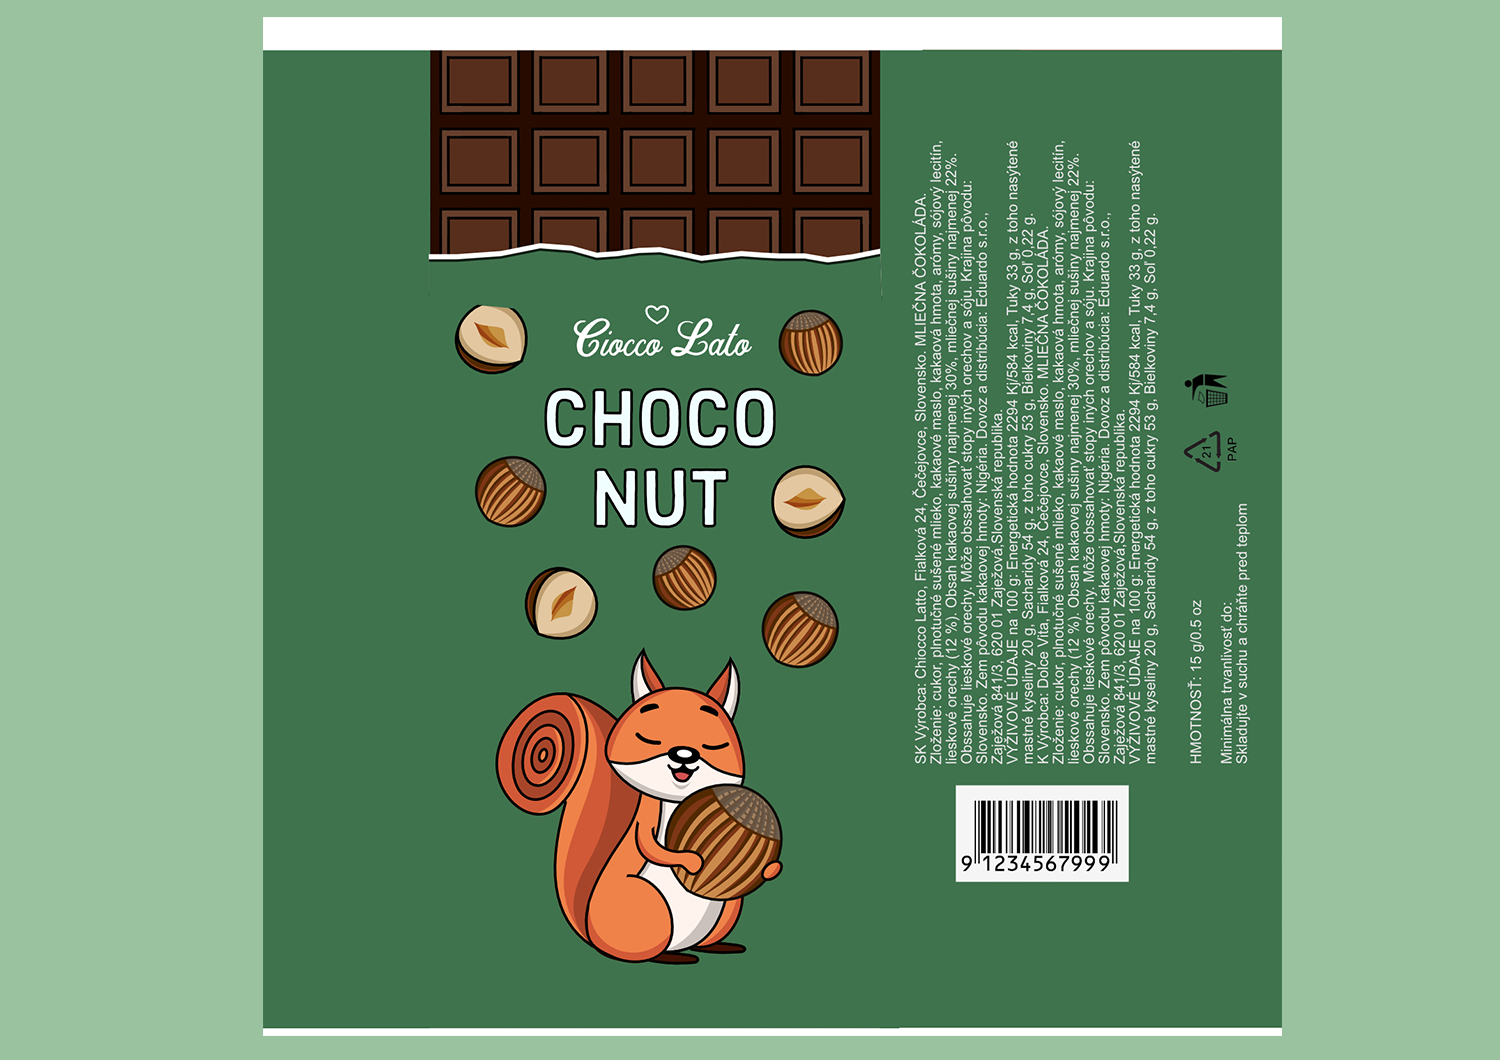 Package design